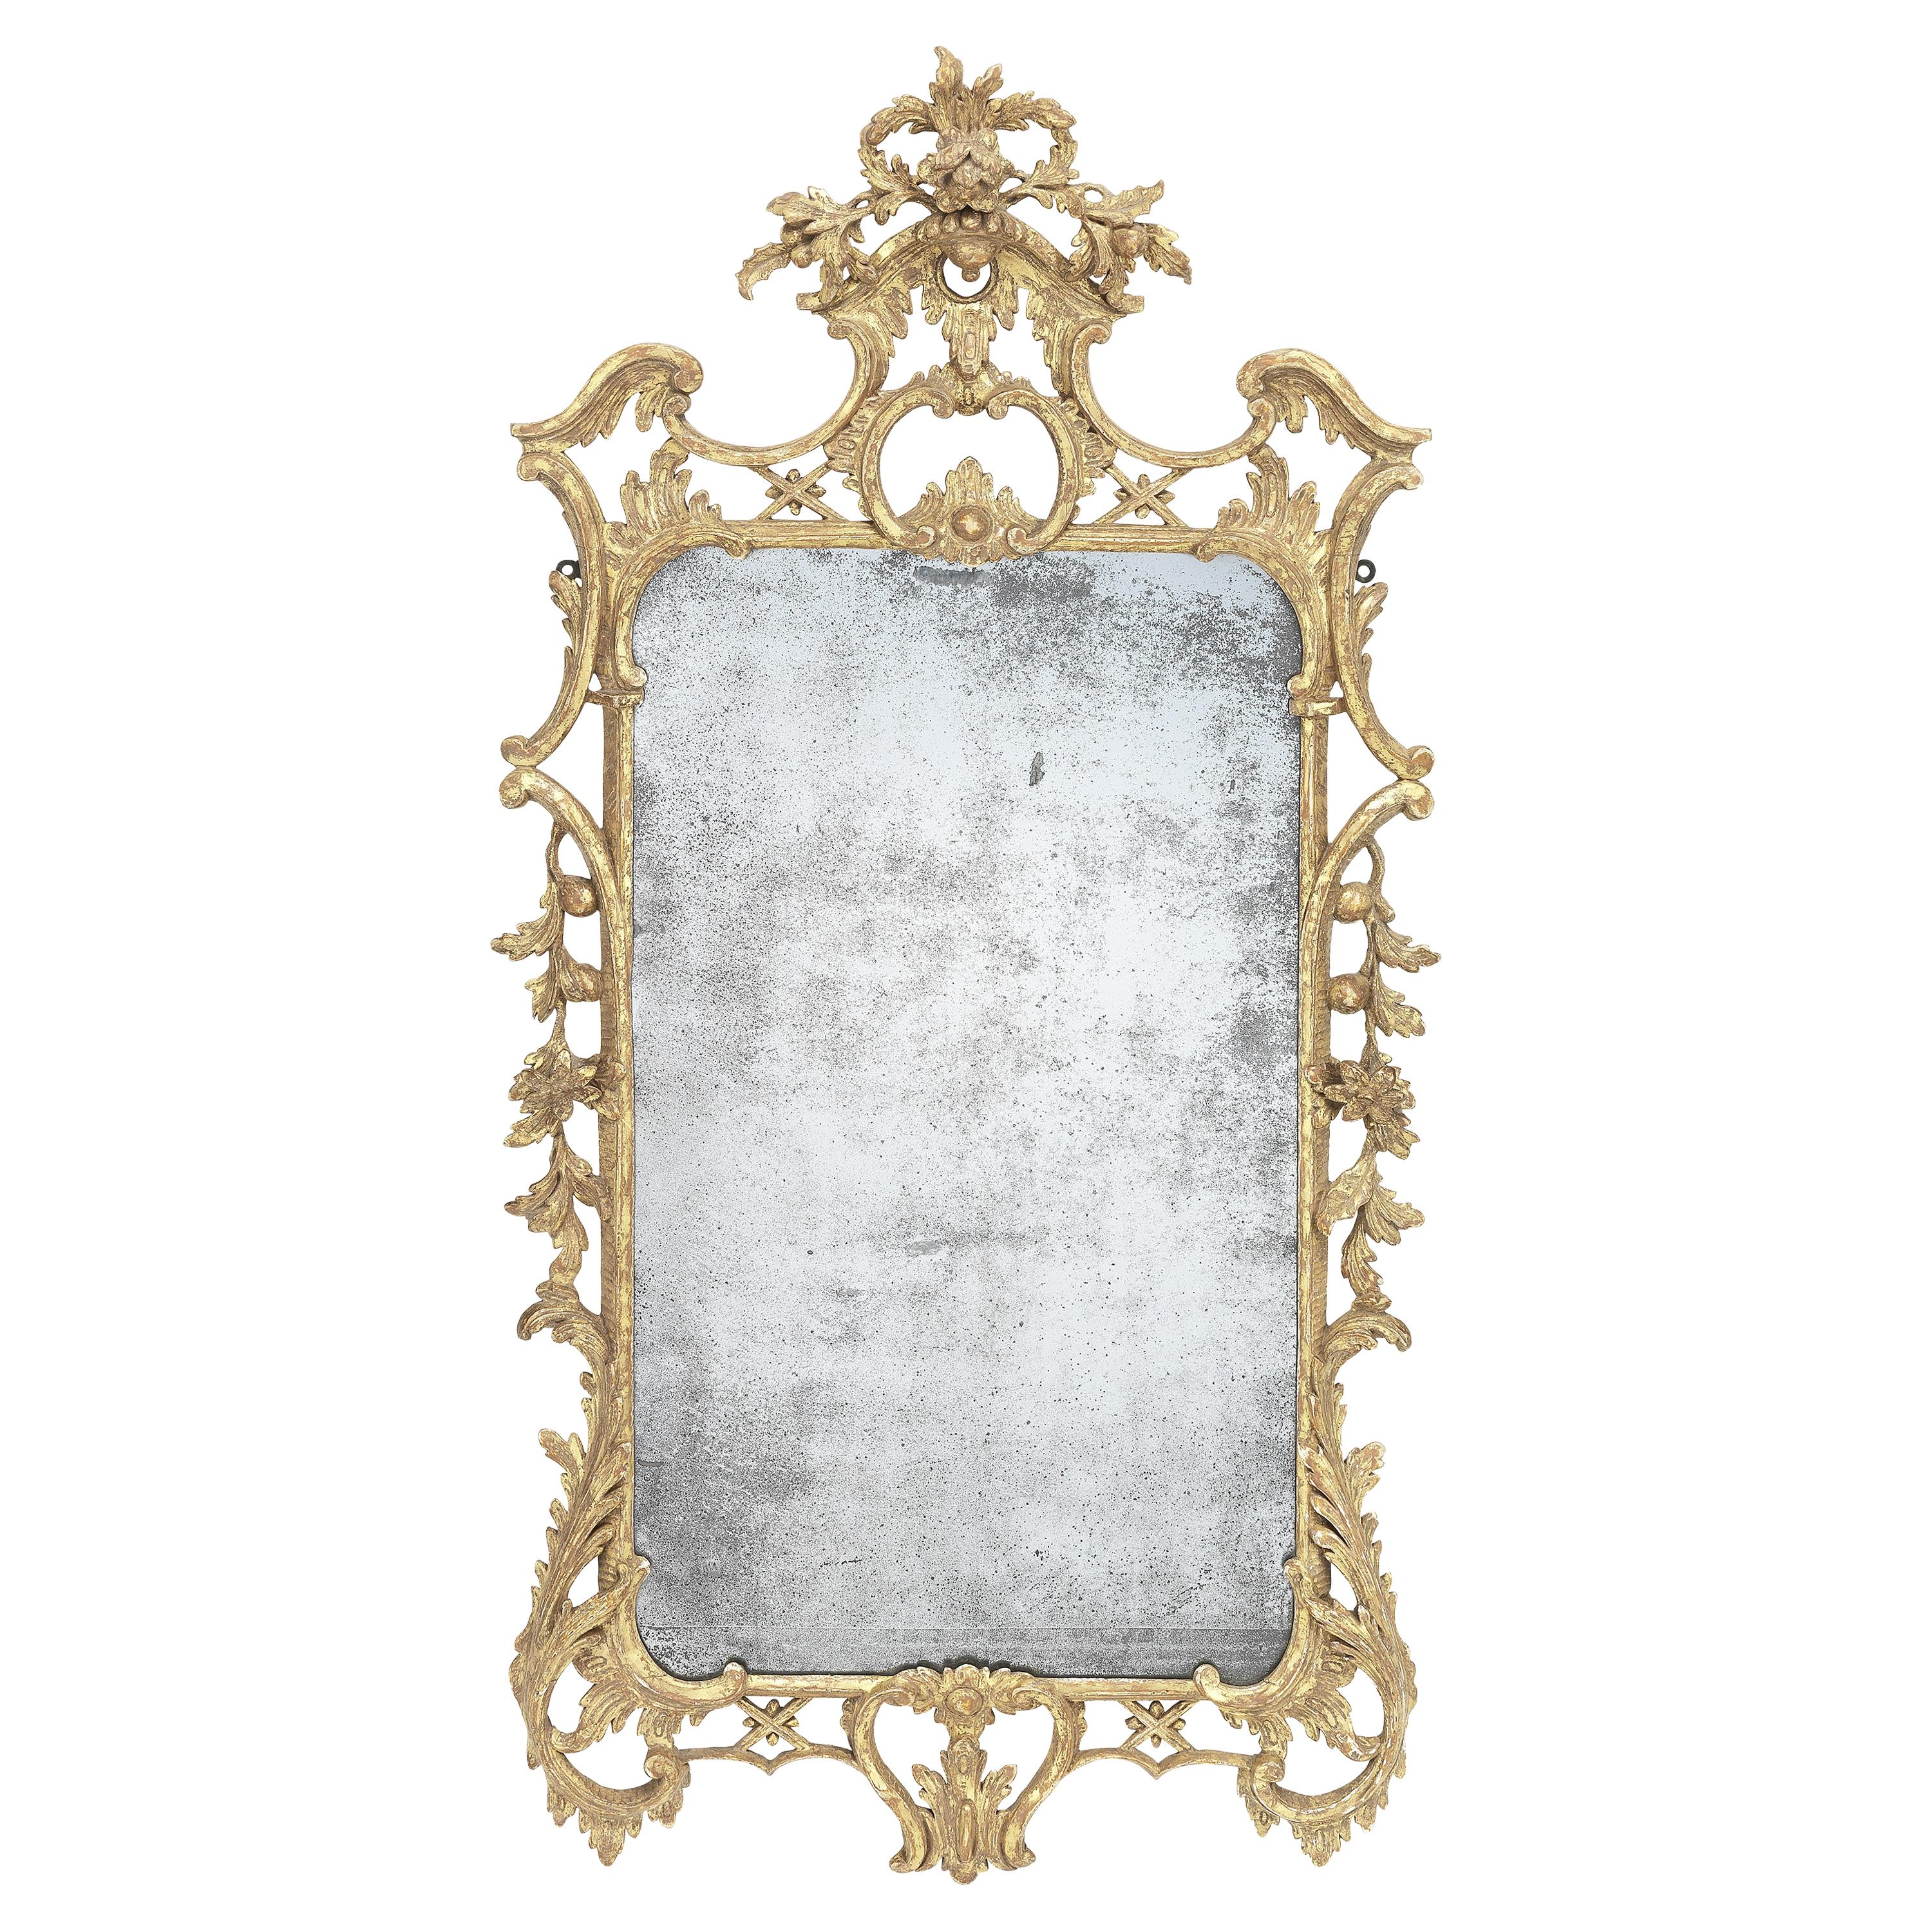 George III Chippendale Period Giltwood Mirror in the Manner of Thomas Johnson